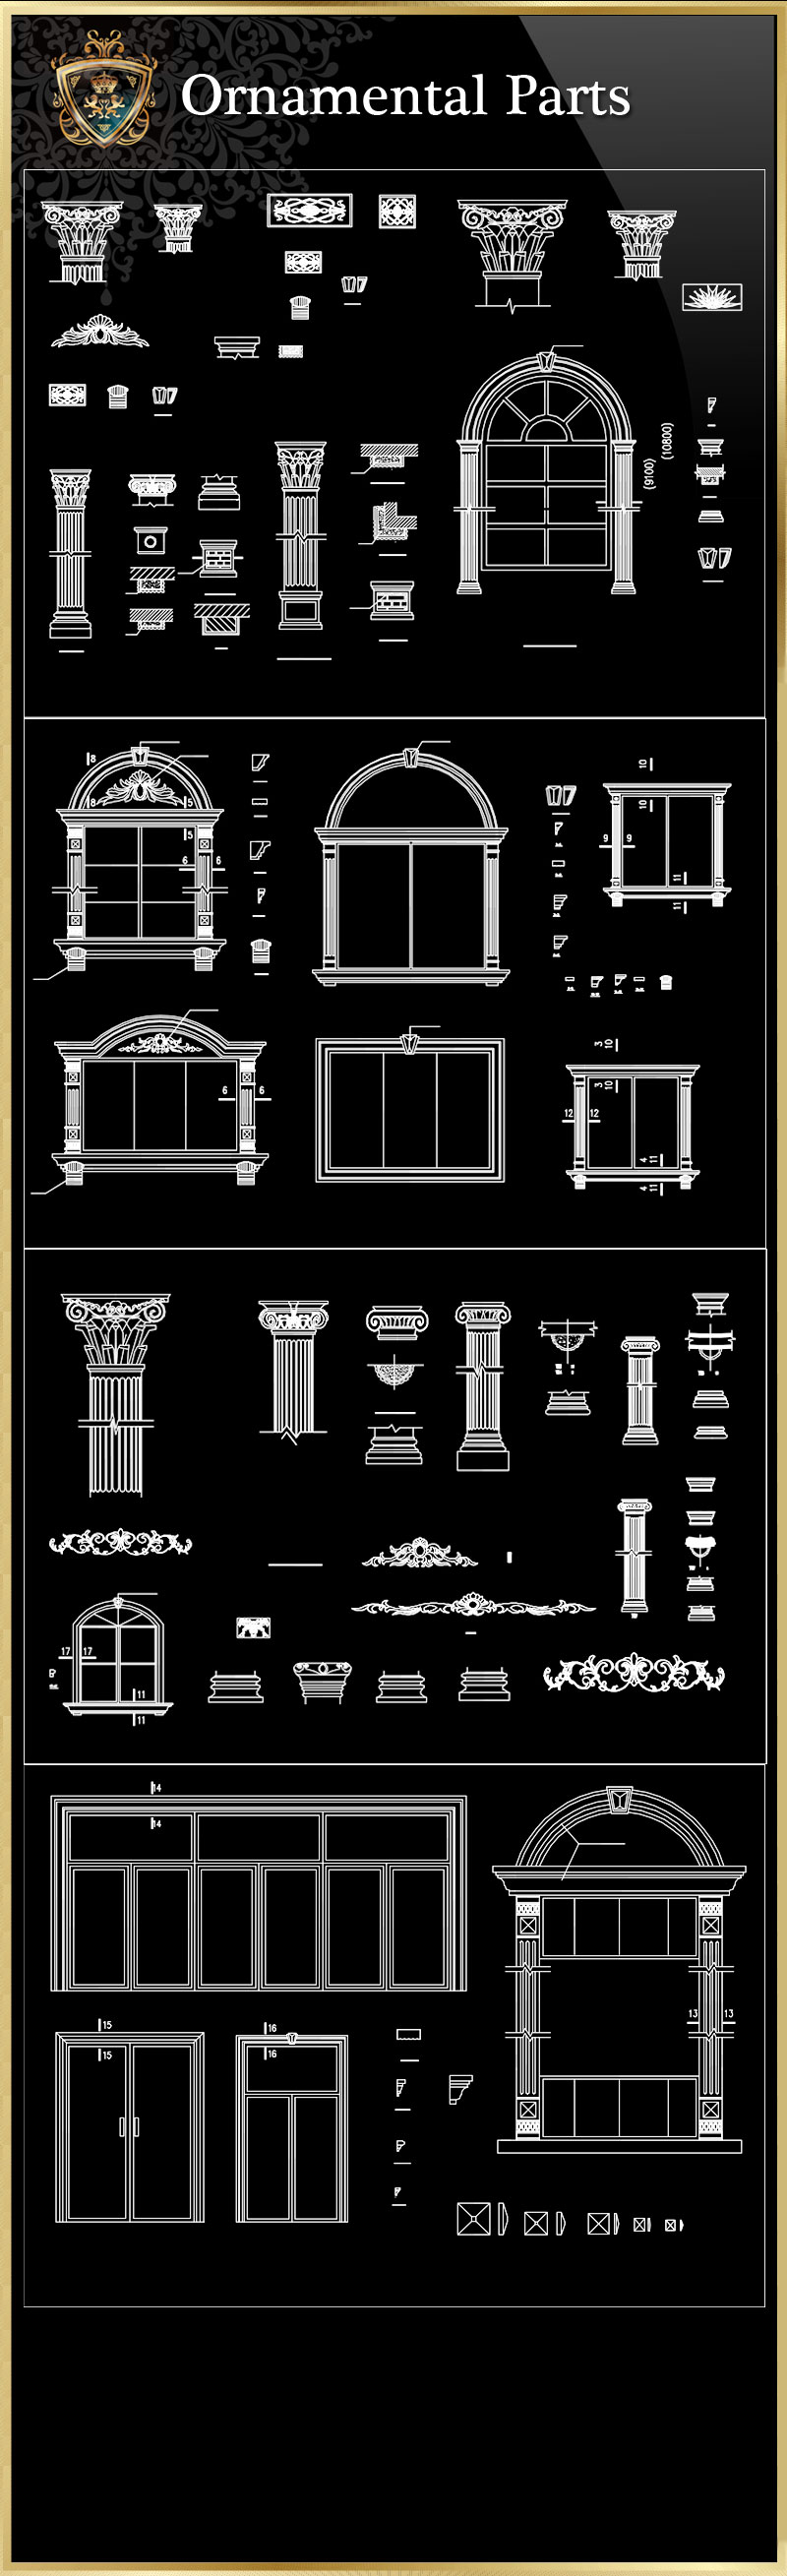 ★【Ornamental Parts of Buildings 8】Luxury home, Luxury Villas, Luxury Palace, Architecture Ornamental Parts, Decorative Inserts & Accessories, Handrail & Stairway Parts, Outdoor House Accessories, Euro Architectural Components, Arcade